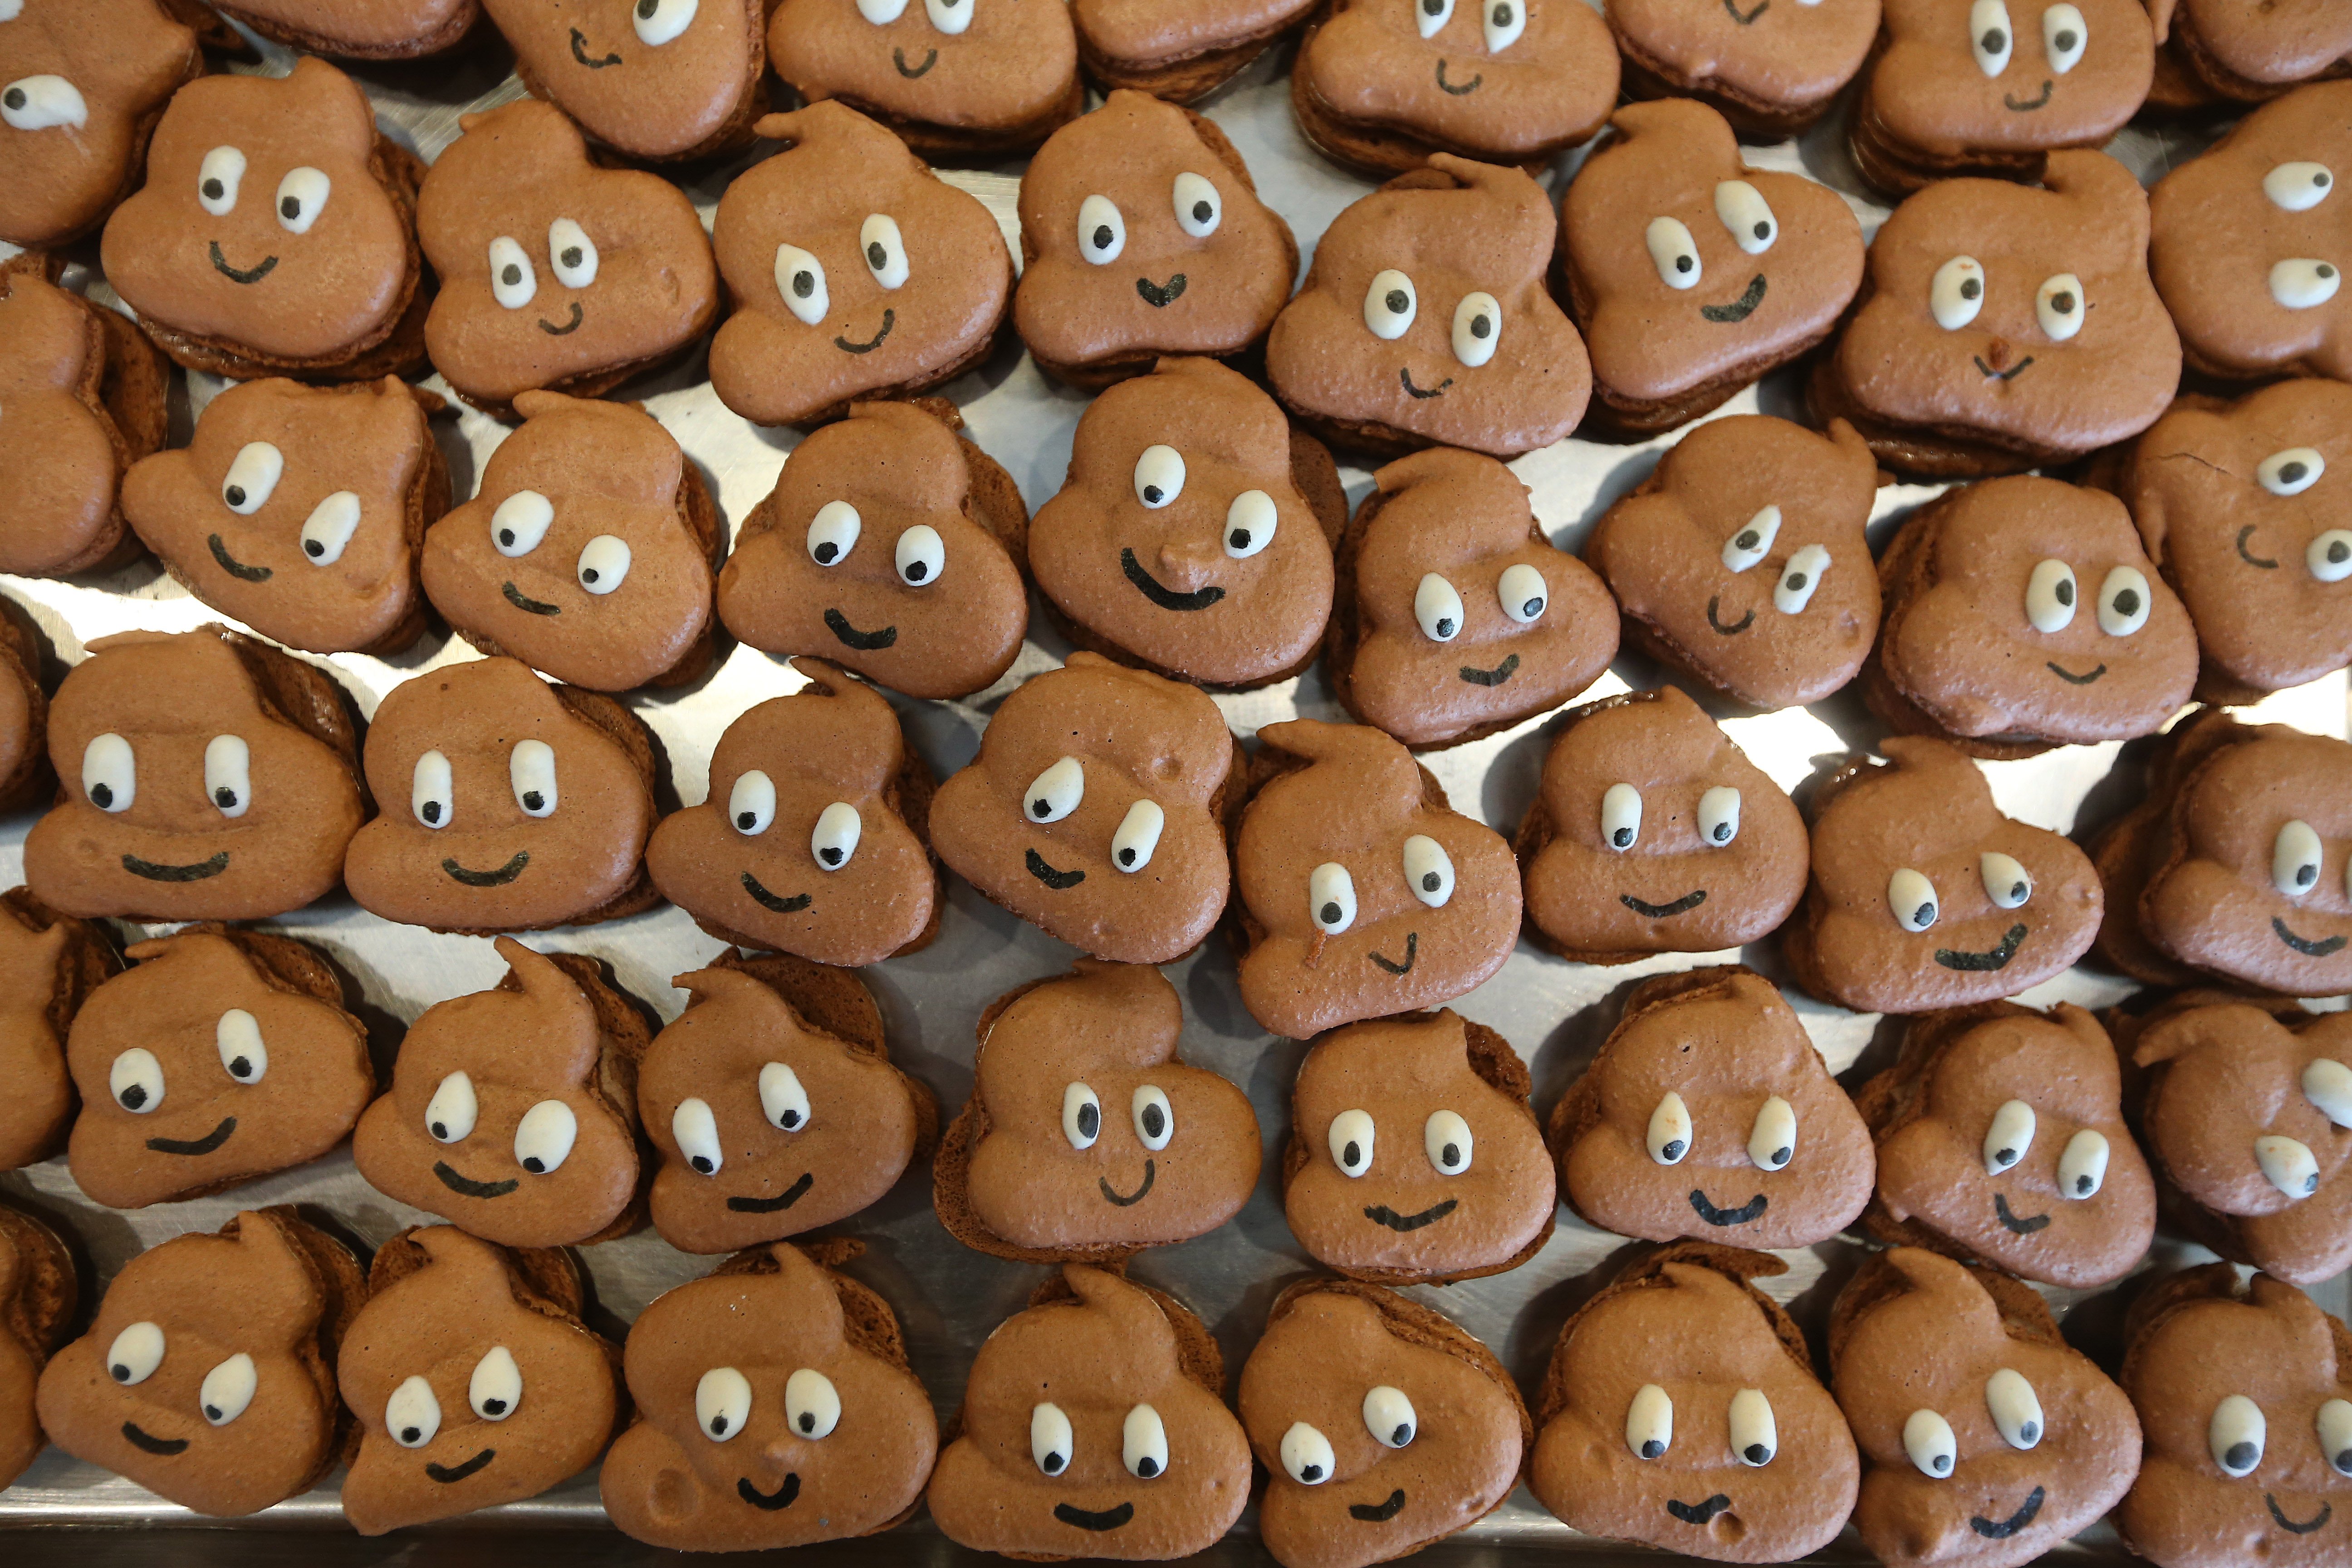 Macarons shaped like the poop emoji with smiley faces on them. 